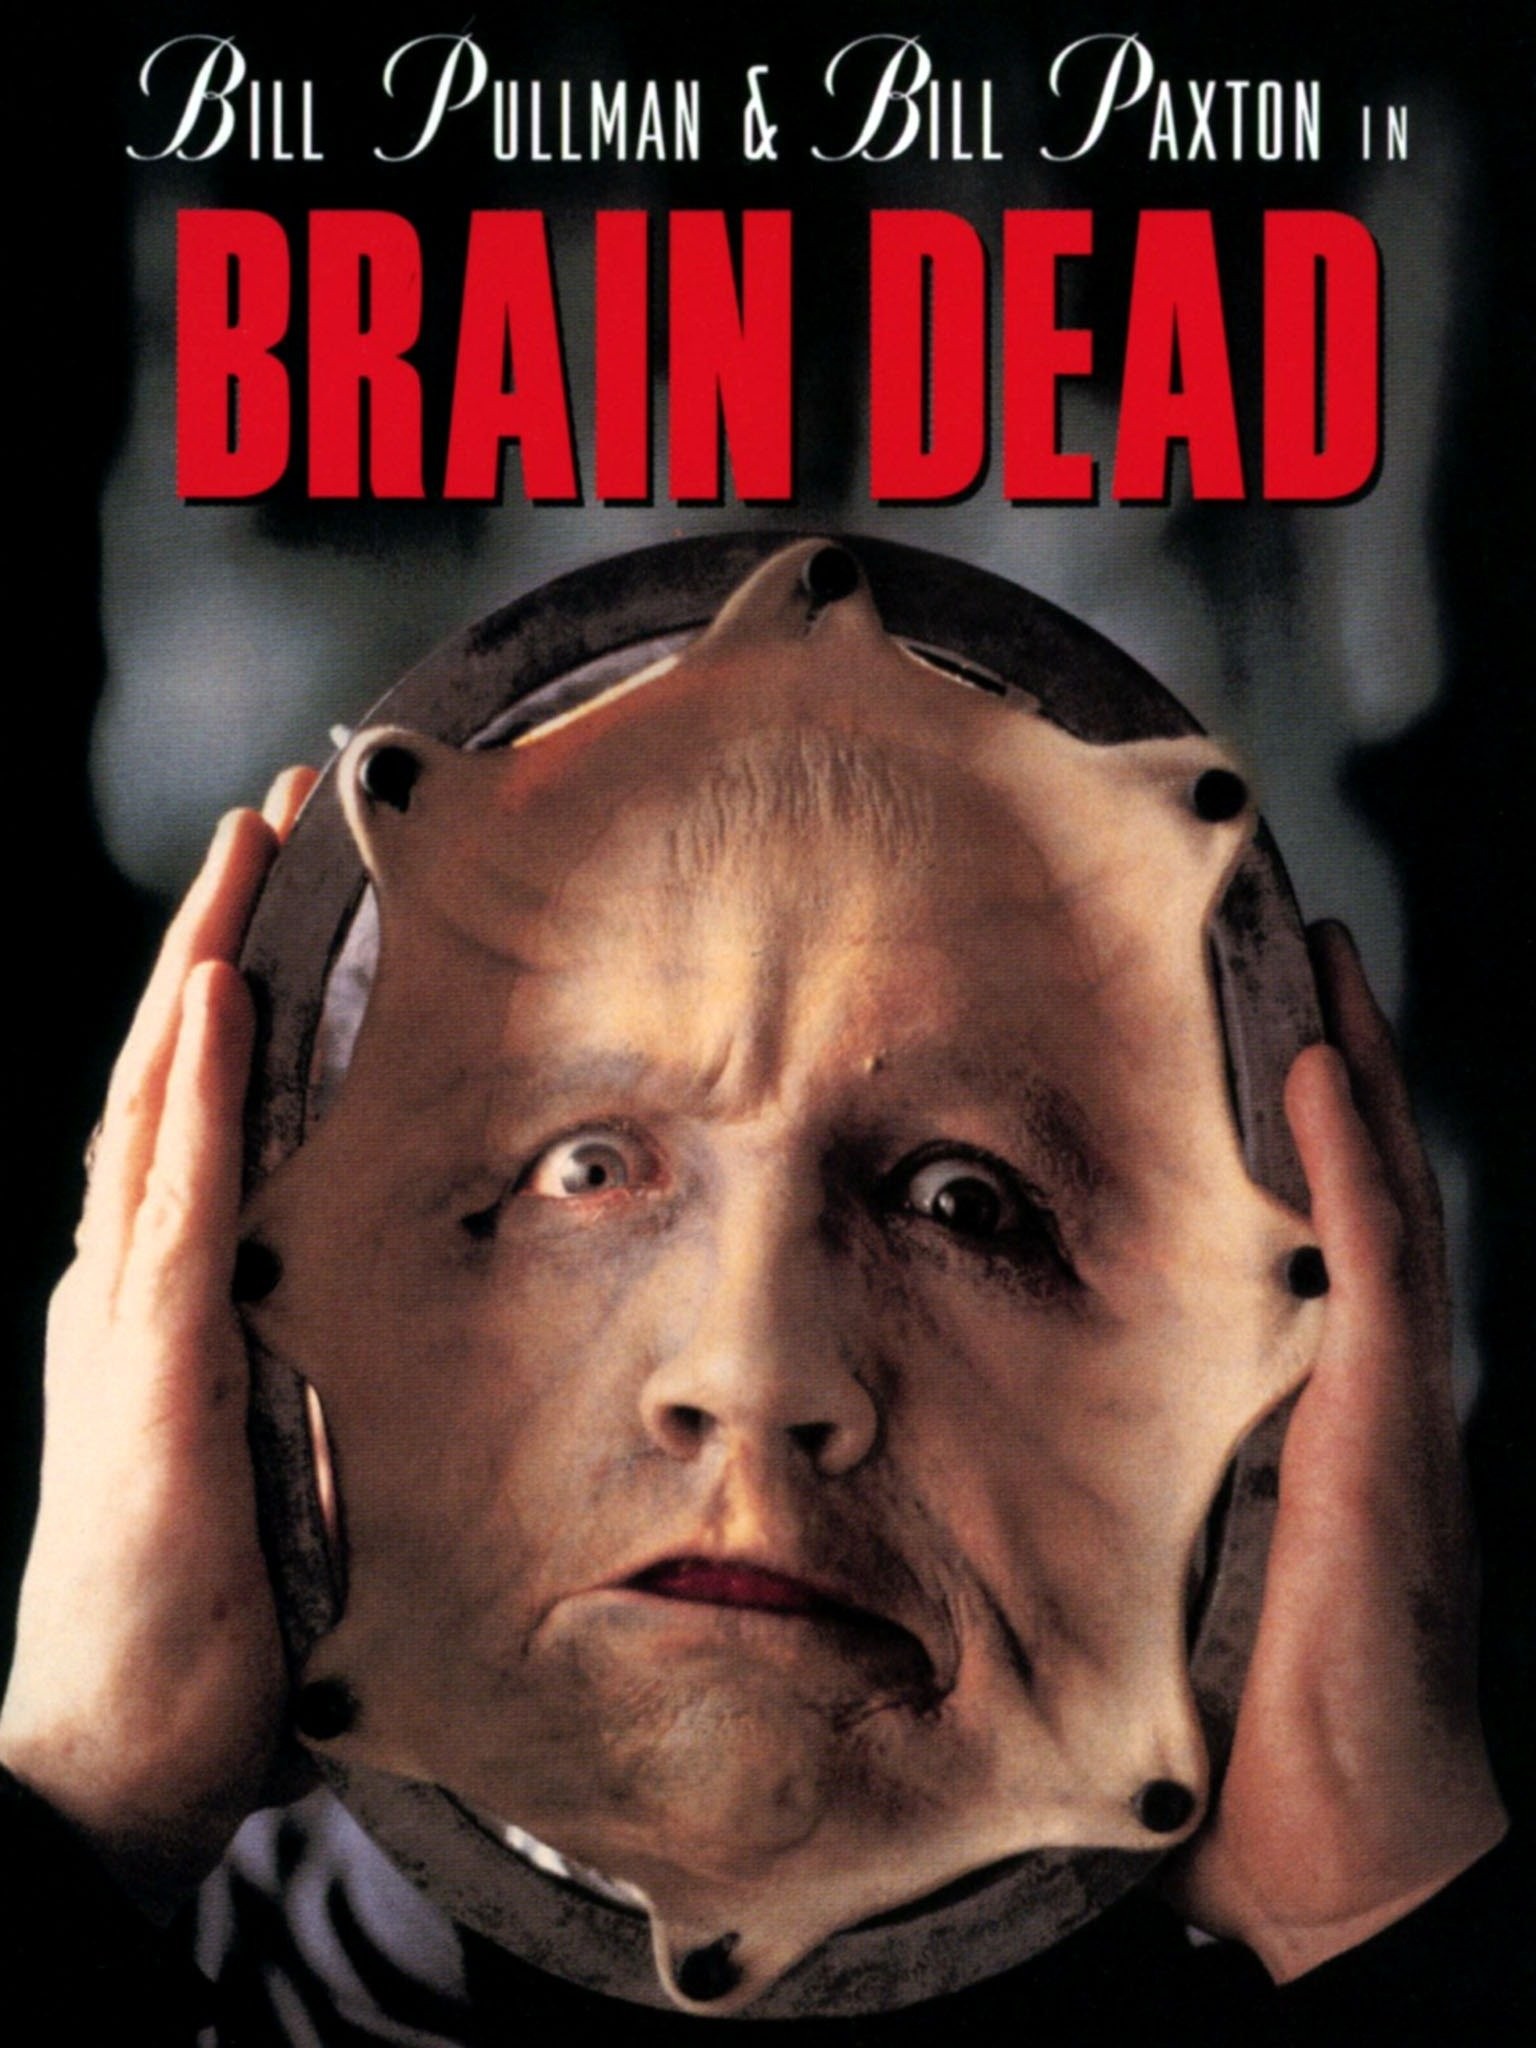 The Brain (VHS, 1989) for sale online